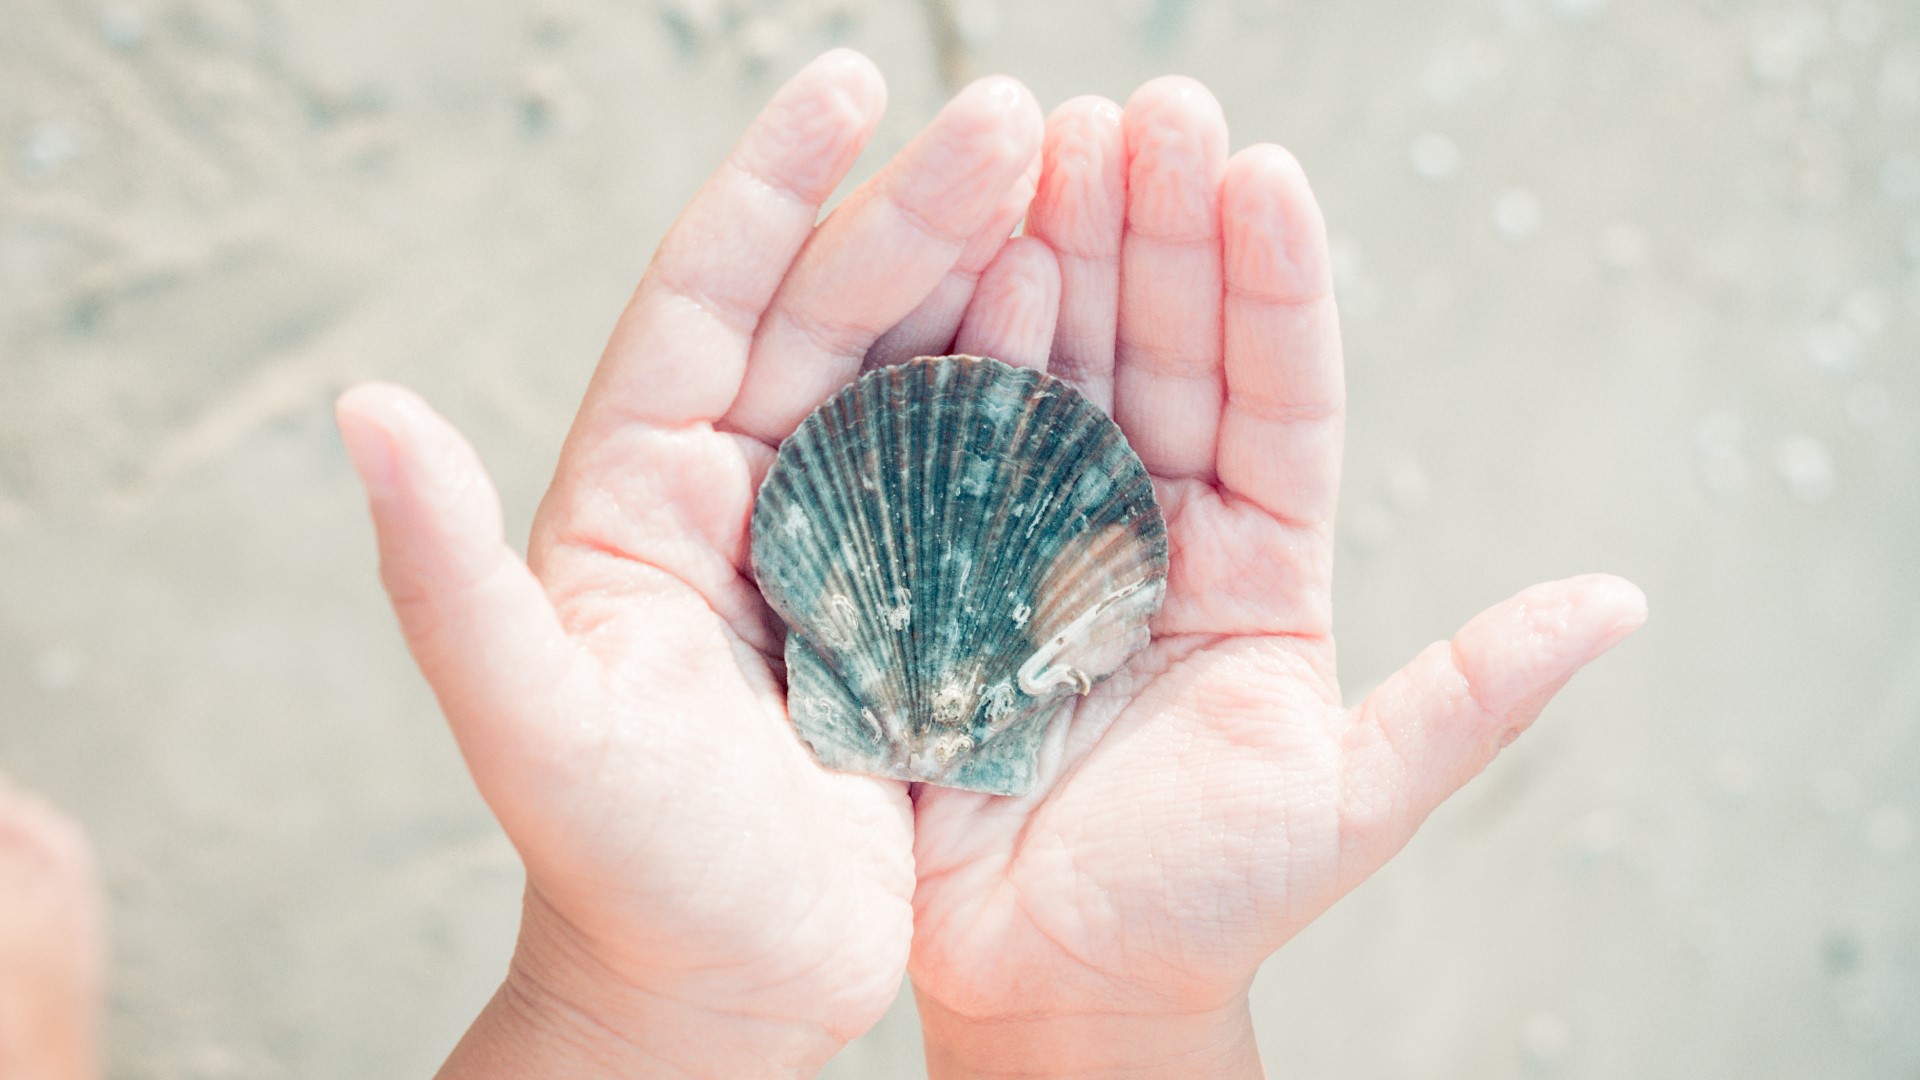 You may want to steer clear of buying shells at souvenir shops this summer as it could be doing more harm than good.